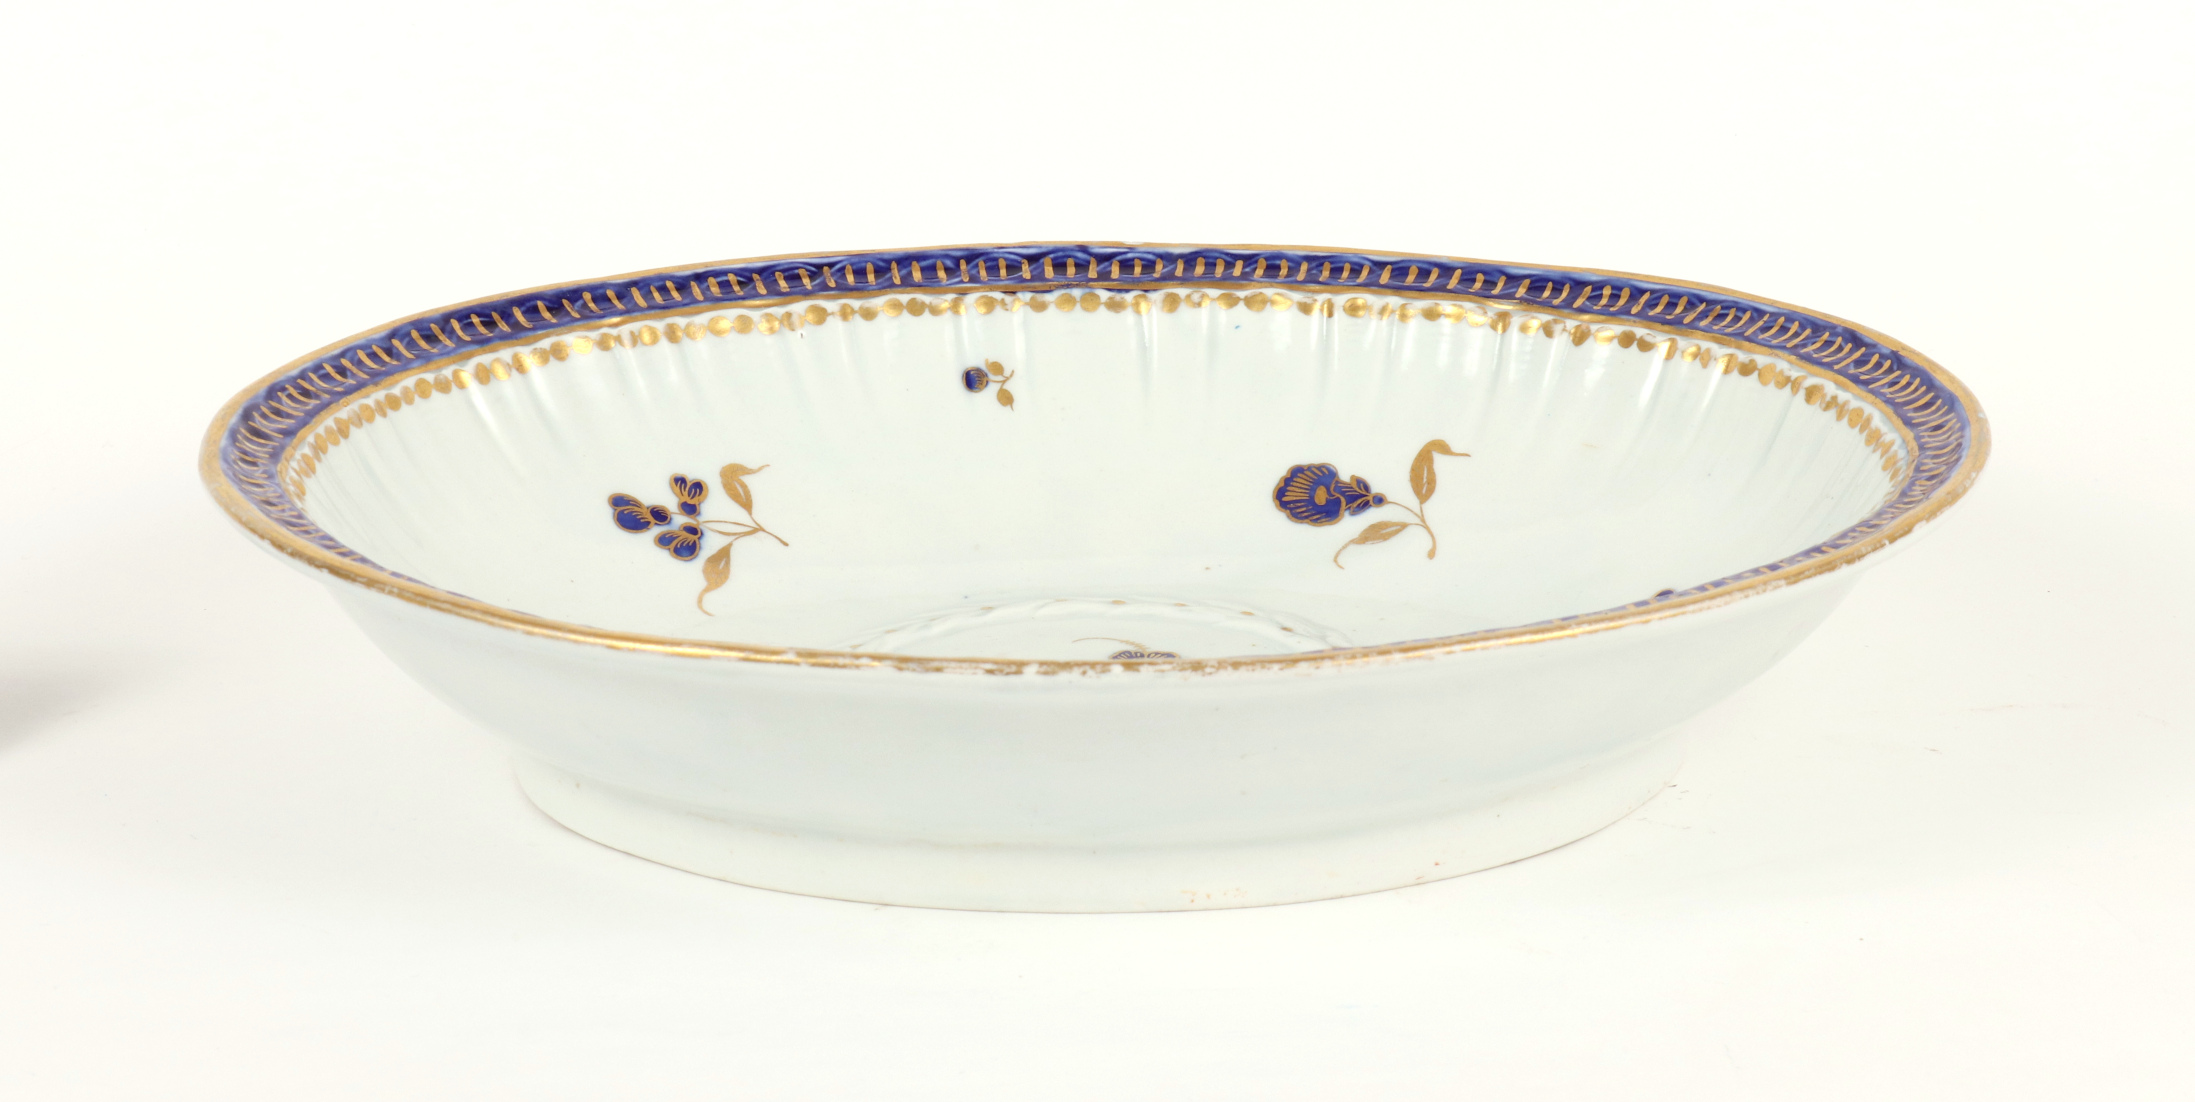 Caughley Oval Bowl, c. 1780-90